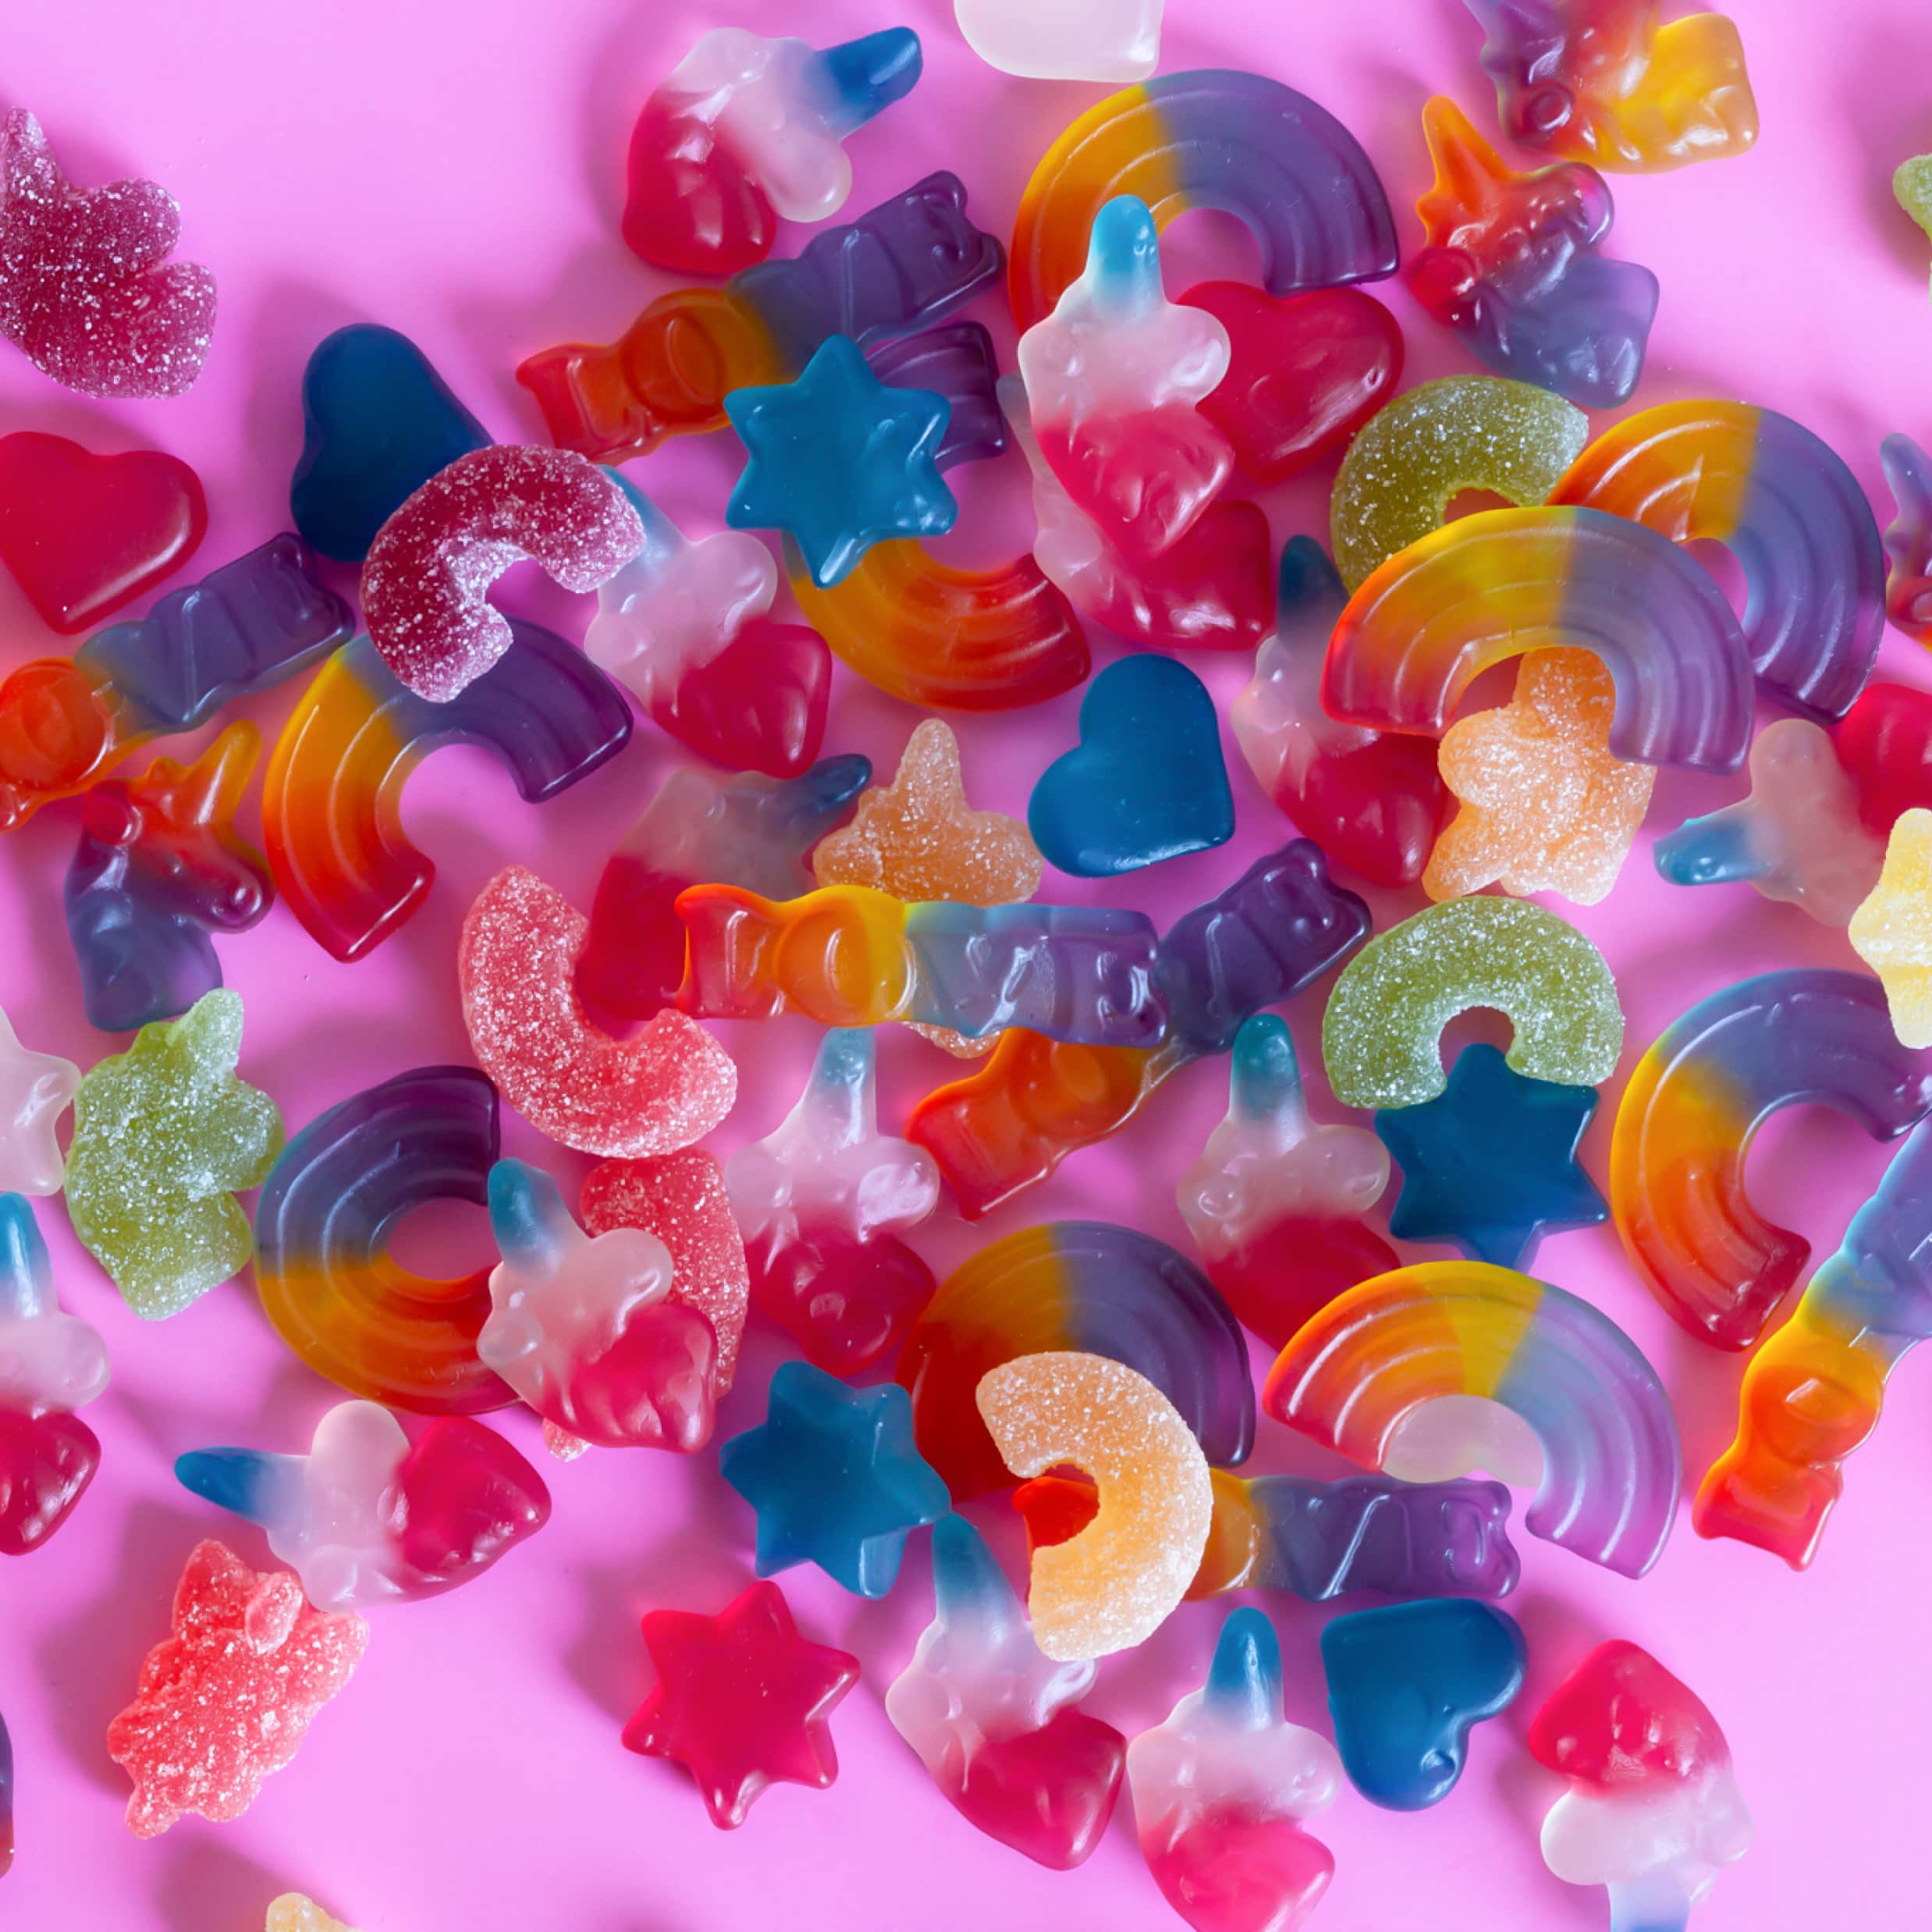 A variety of jelly sweets on a pink background - Kidcore